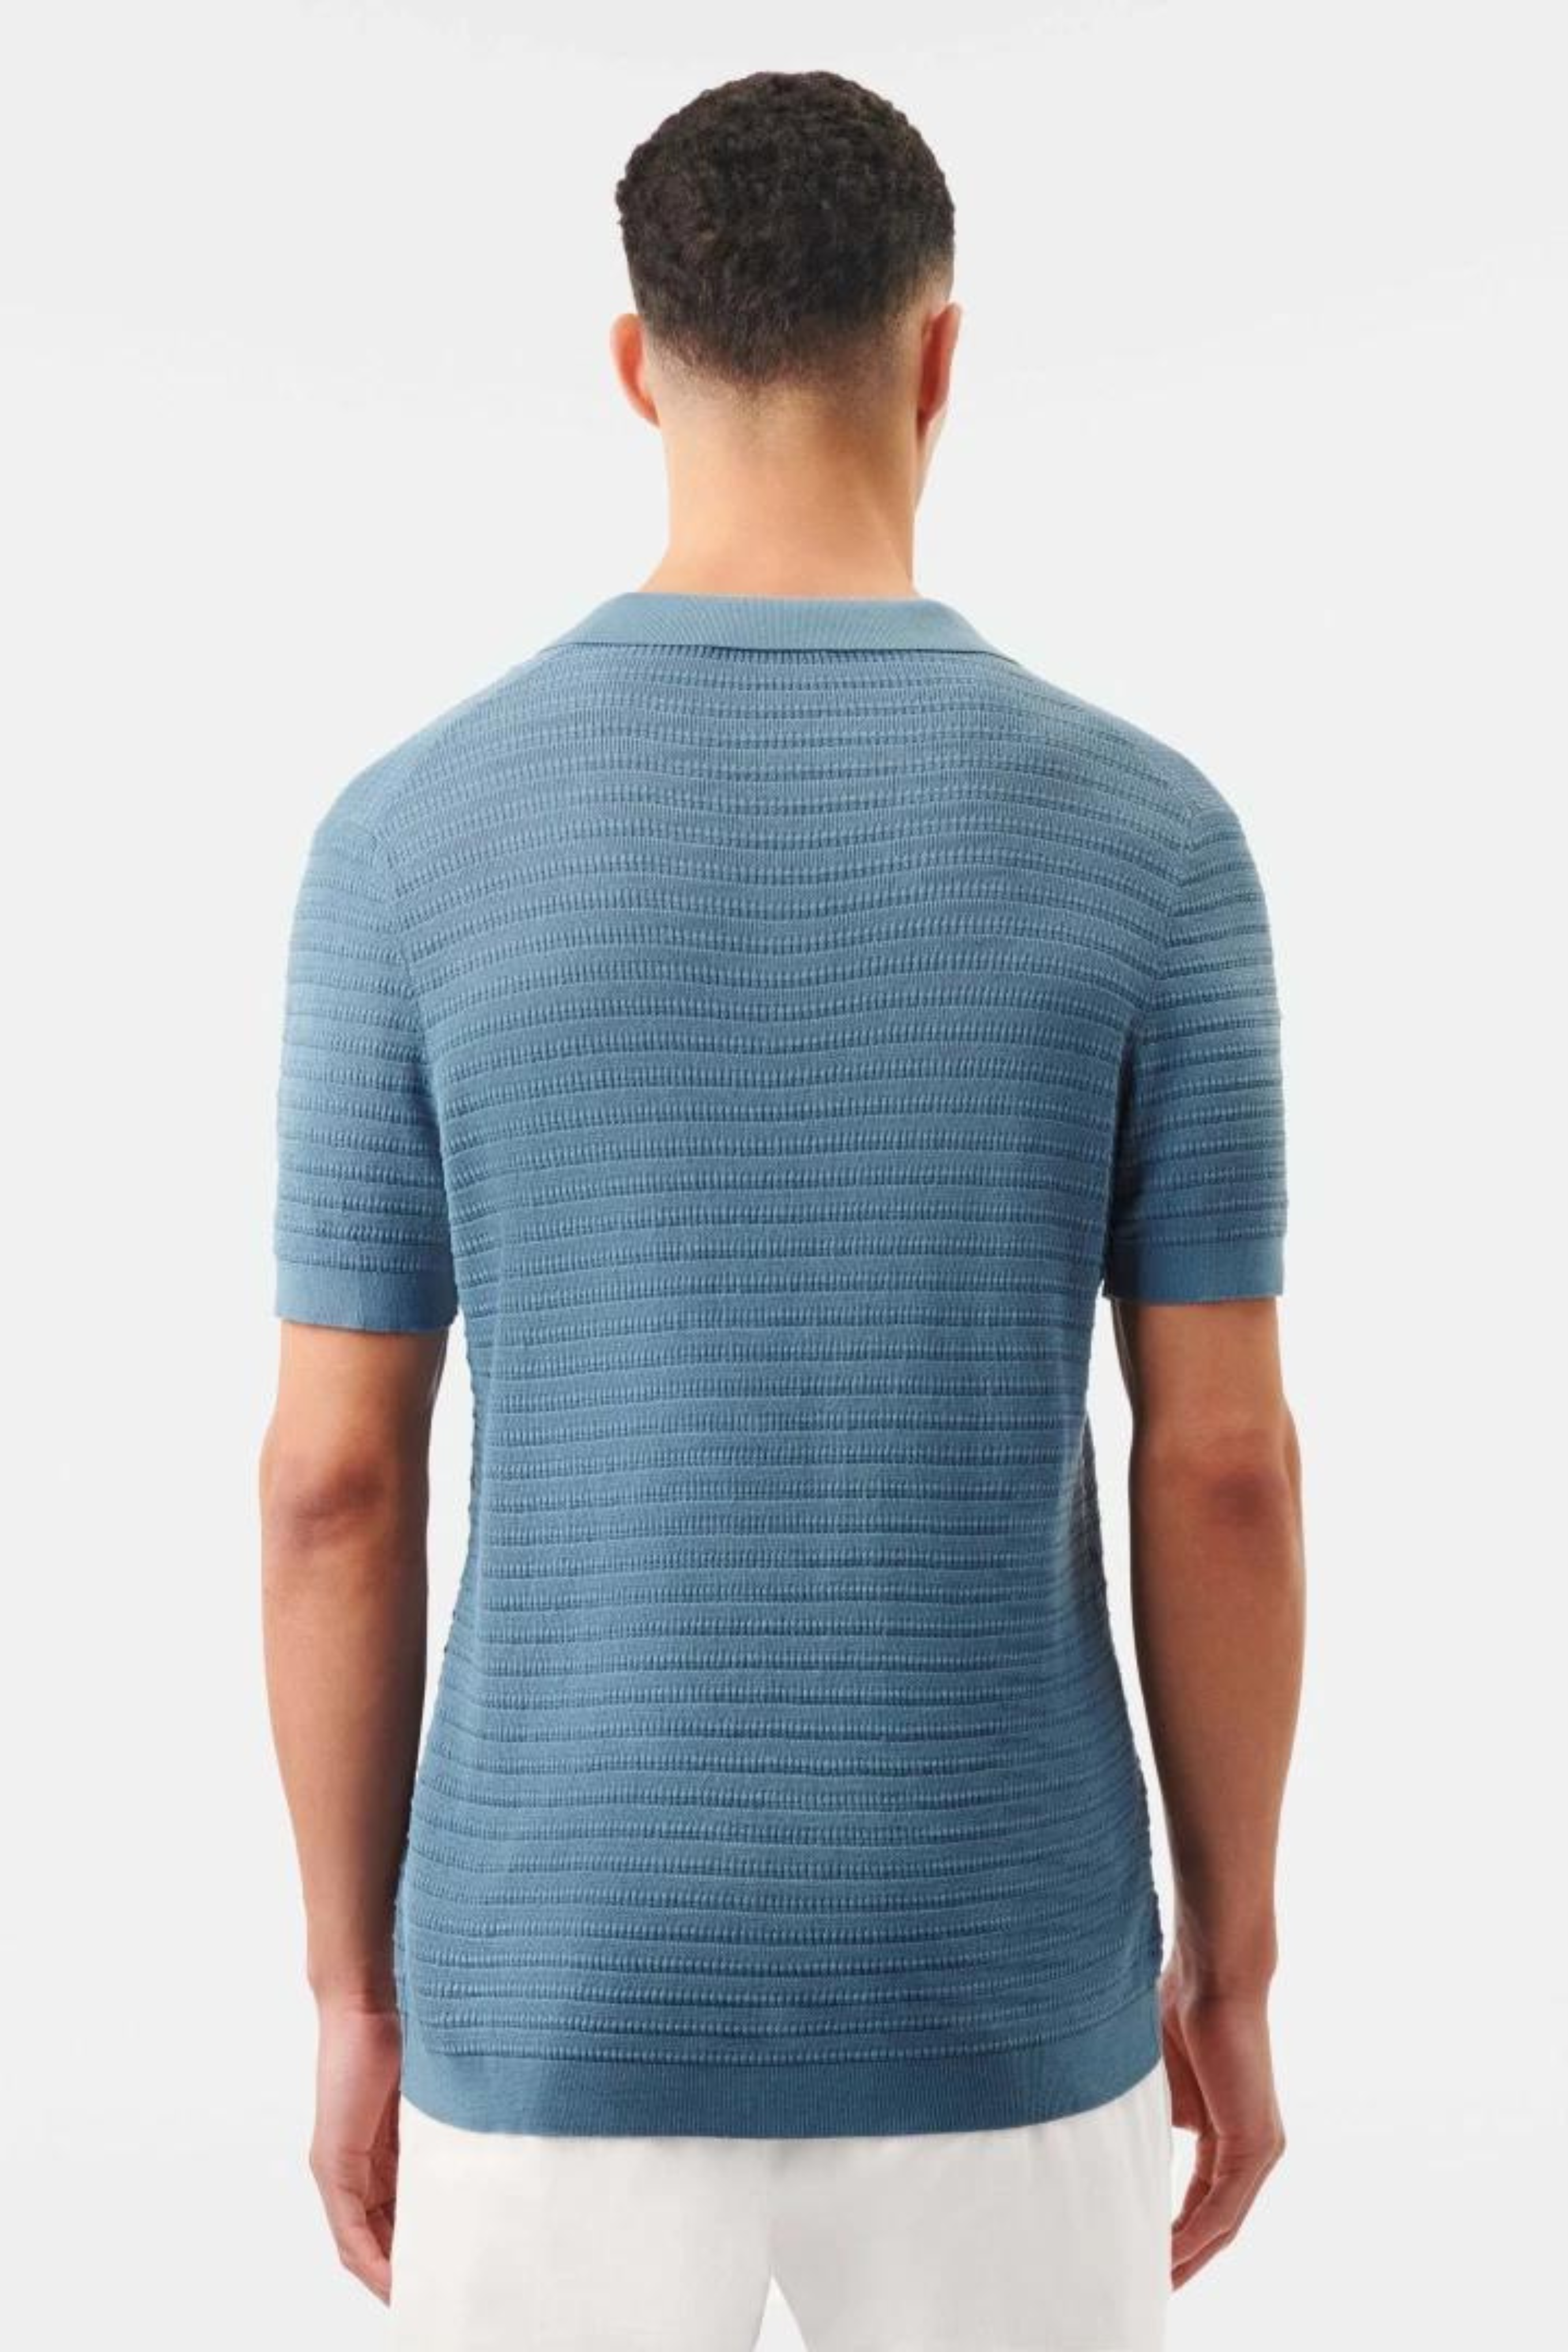 BRAIAN KNITTED POLO - BLUE